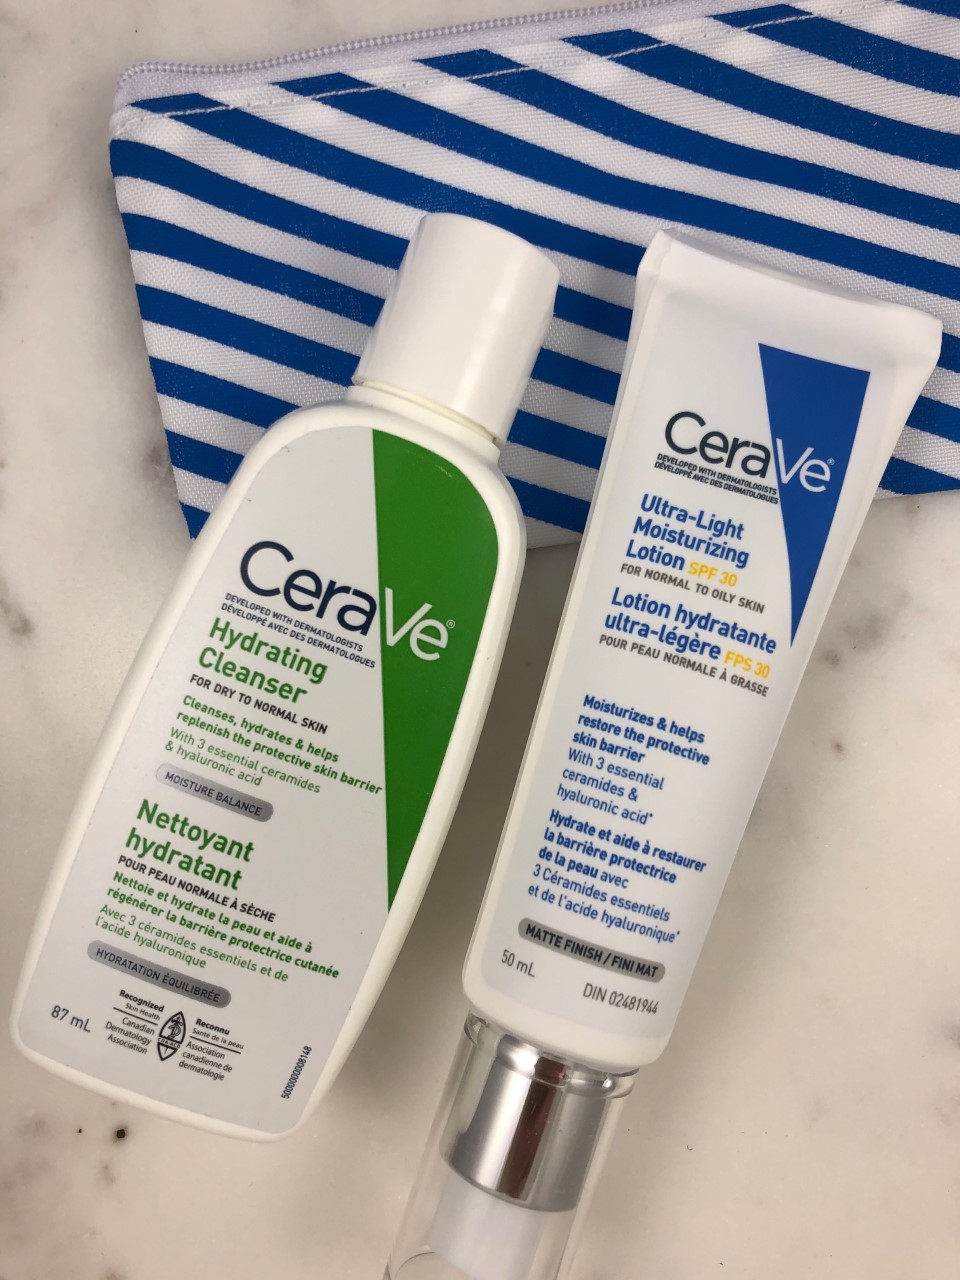 CeraVe Ultra Light Moisturizing Lotion: A quick review